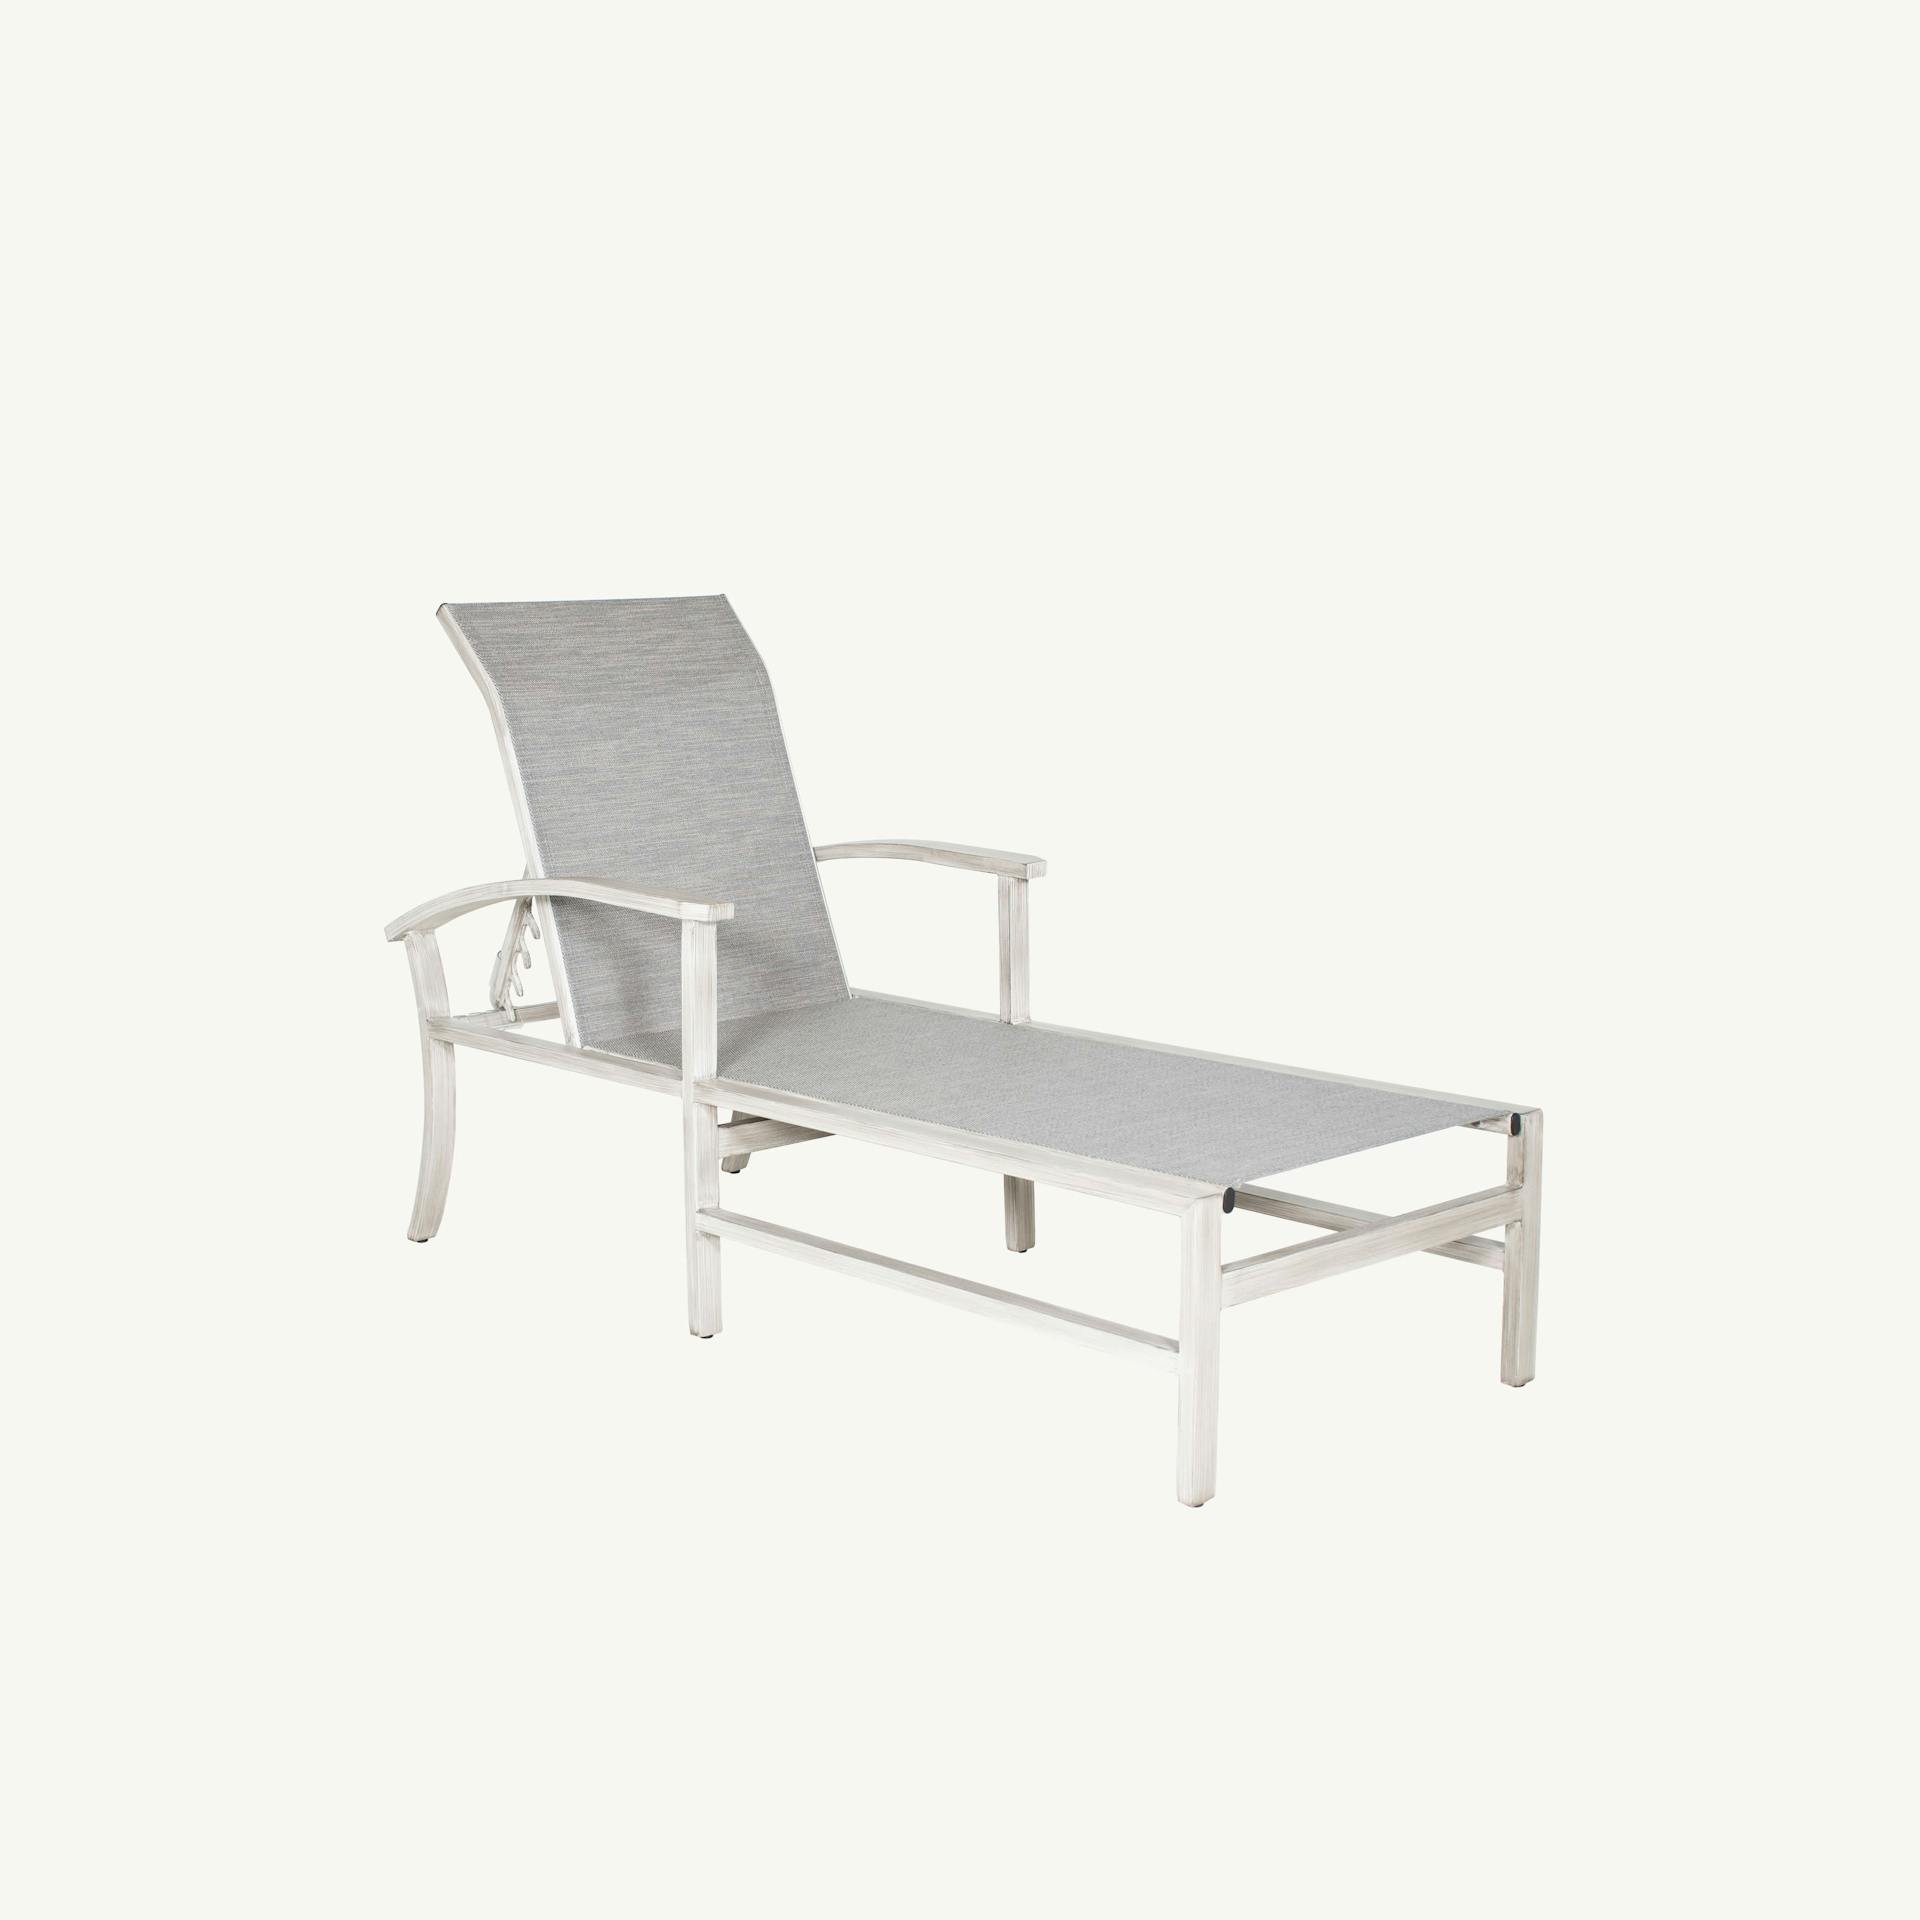 Antler Hill Adjustable Sling Chaise Lounge